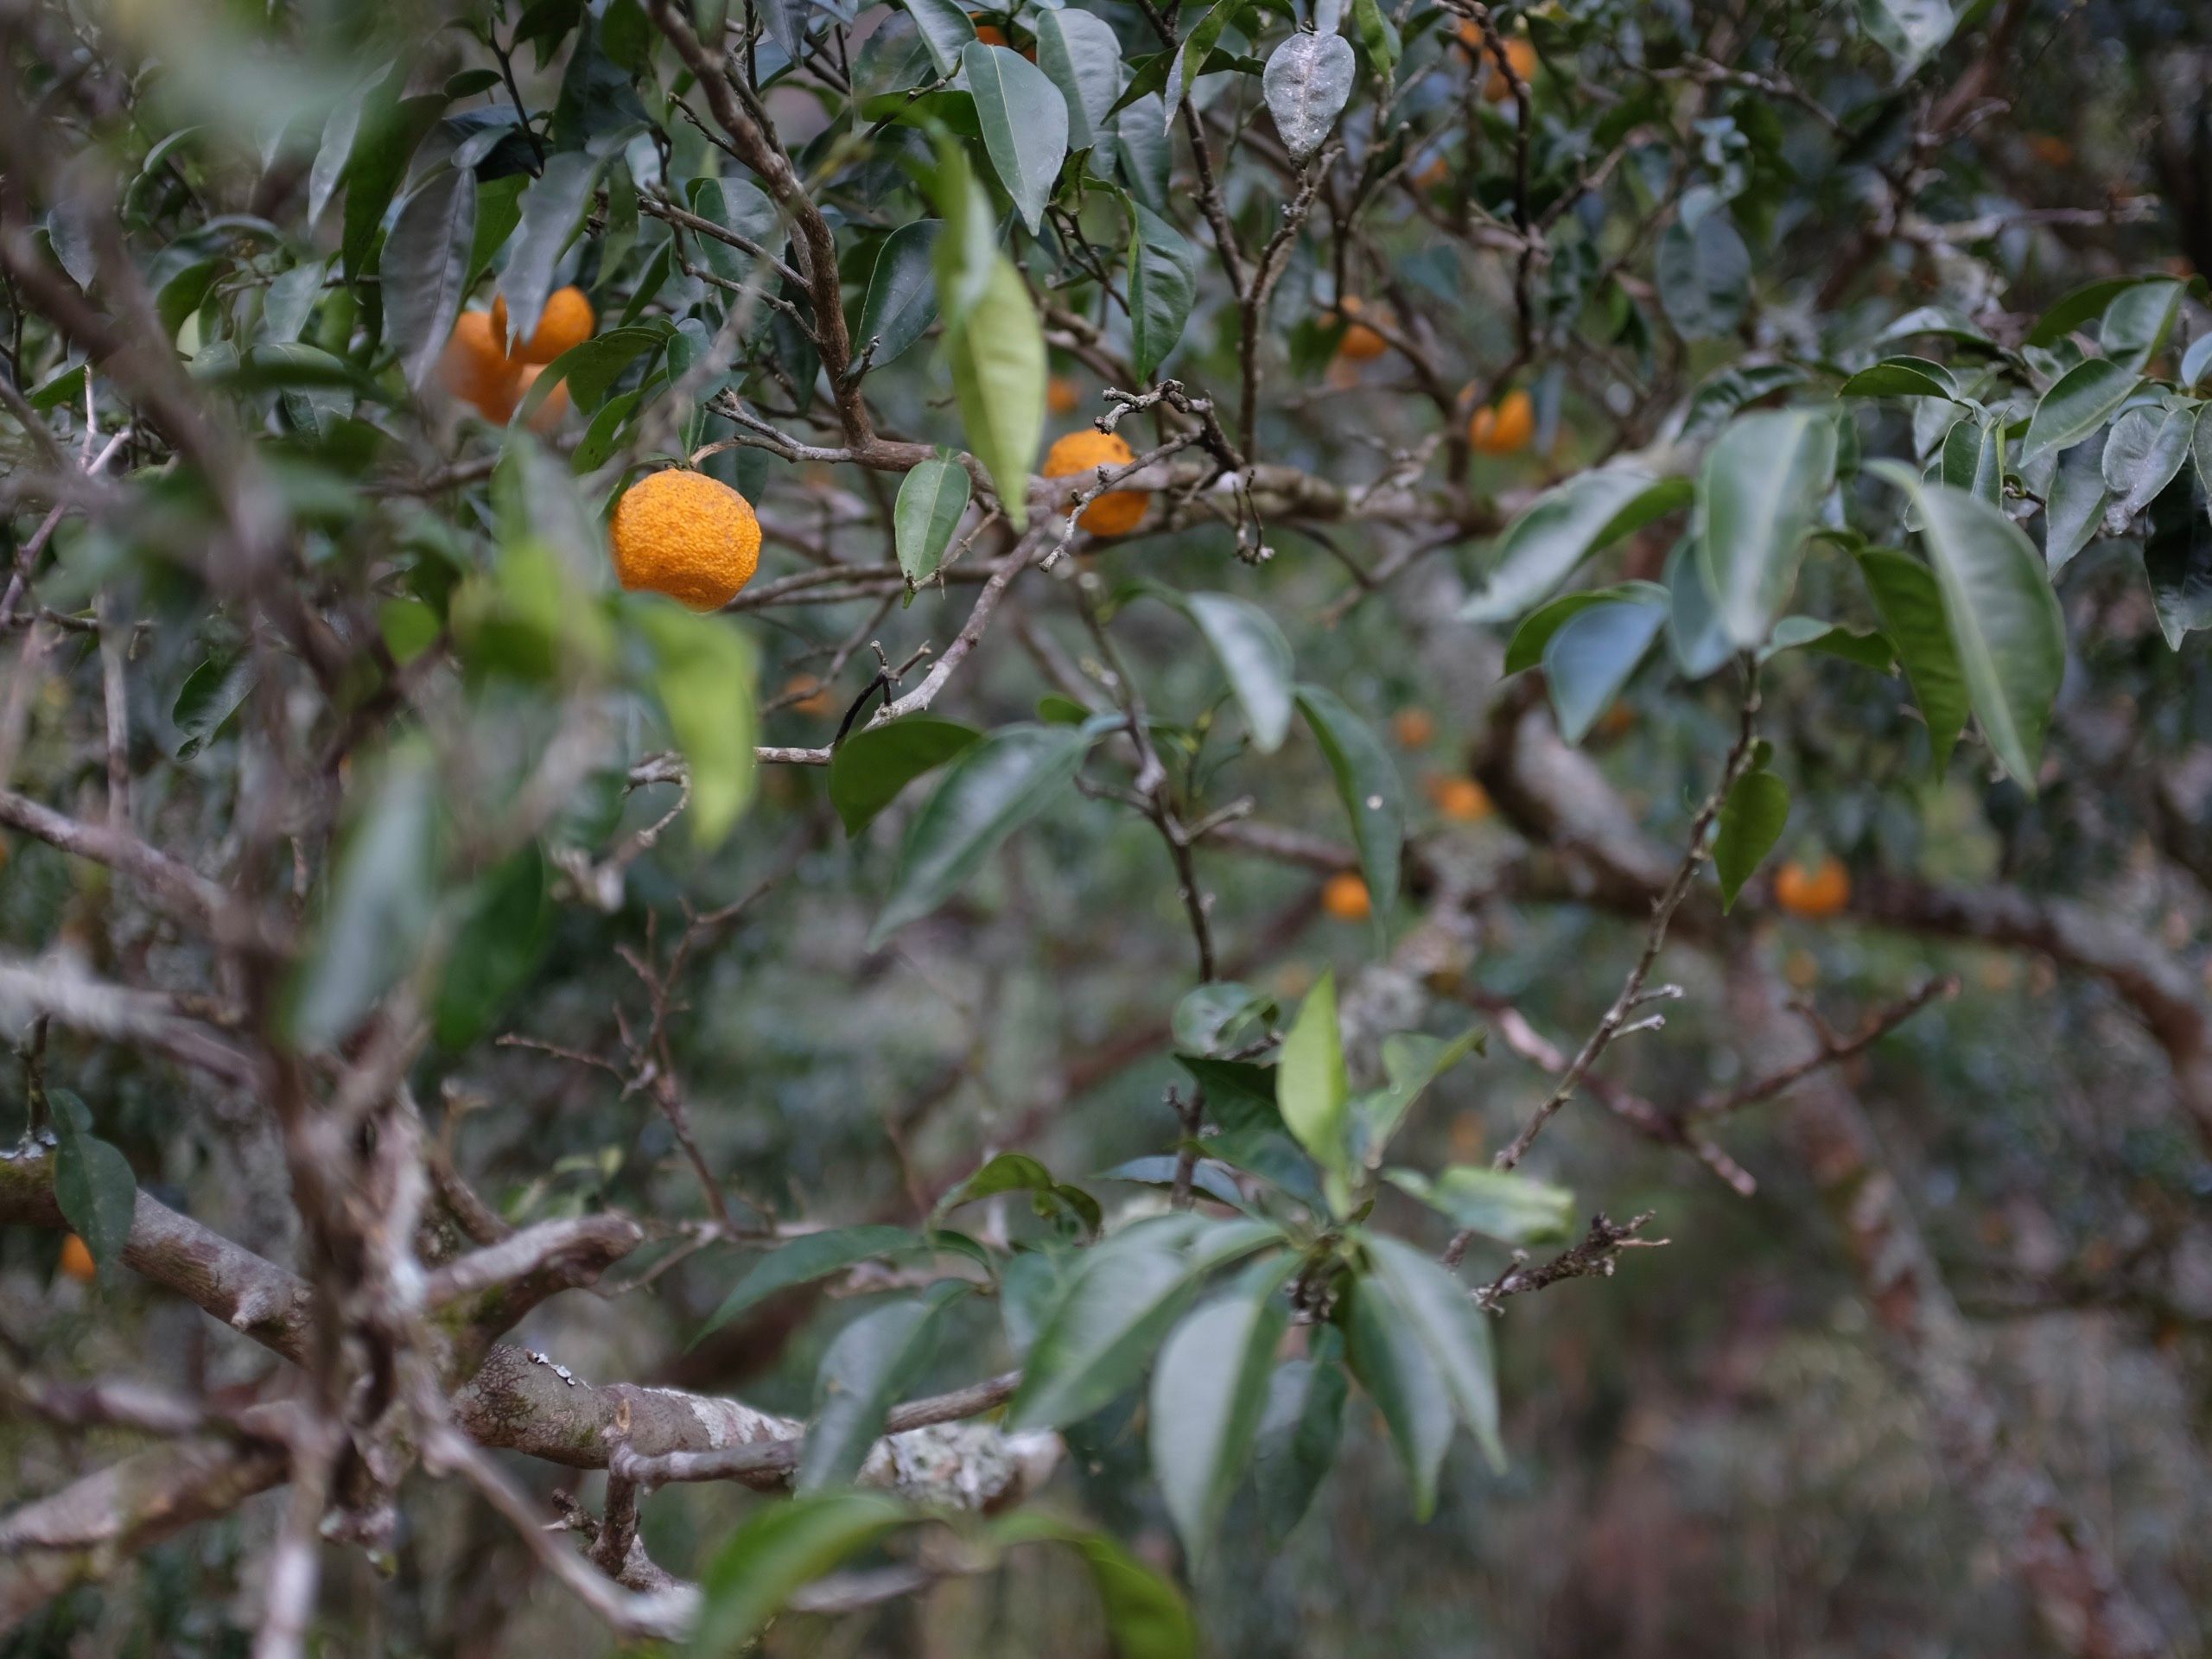 Sudachi citruses, a specialty of this area, grow on a tree.